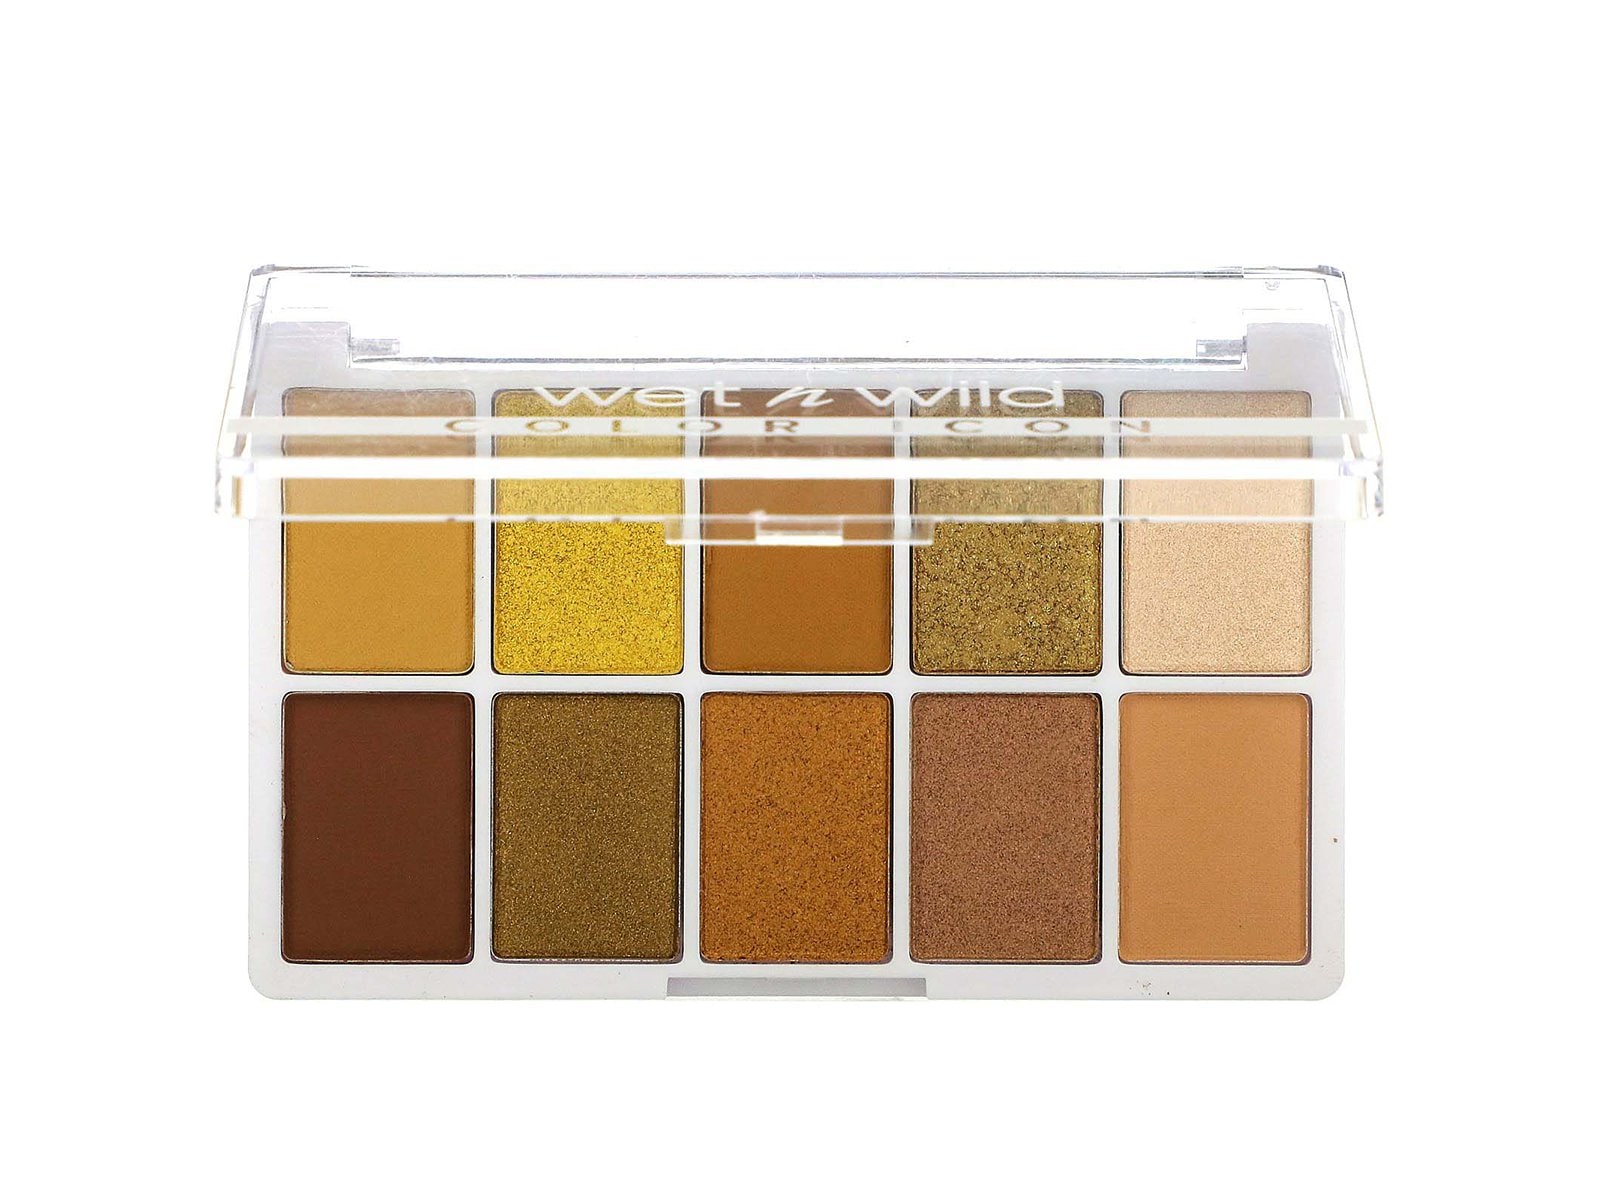 Wet n Wild Color Icon 10-Pan Eyeshadow Palette in Call Me Sunshine, $12.99